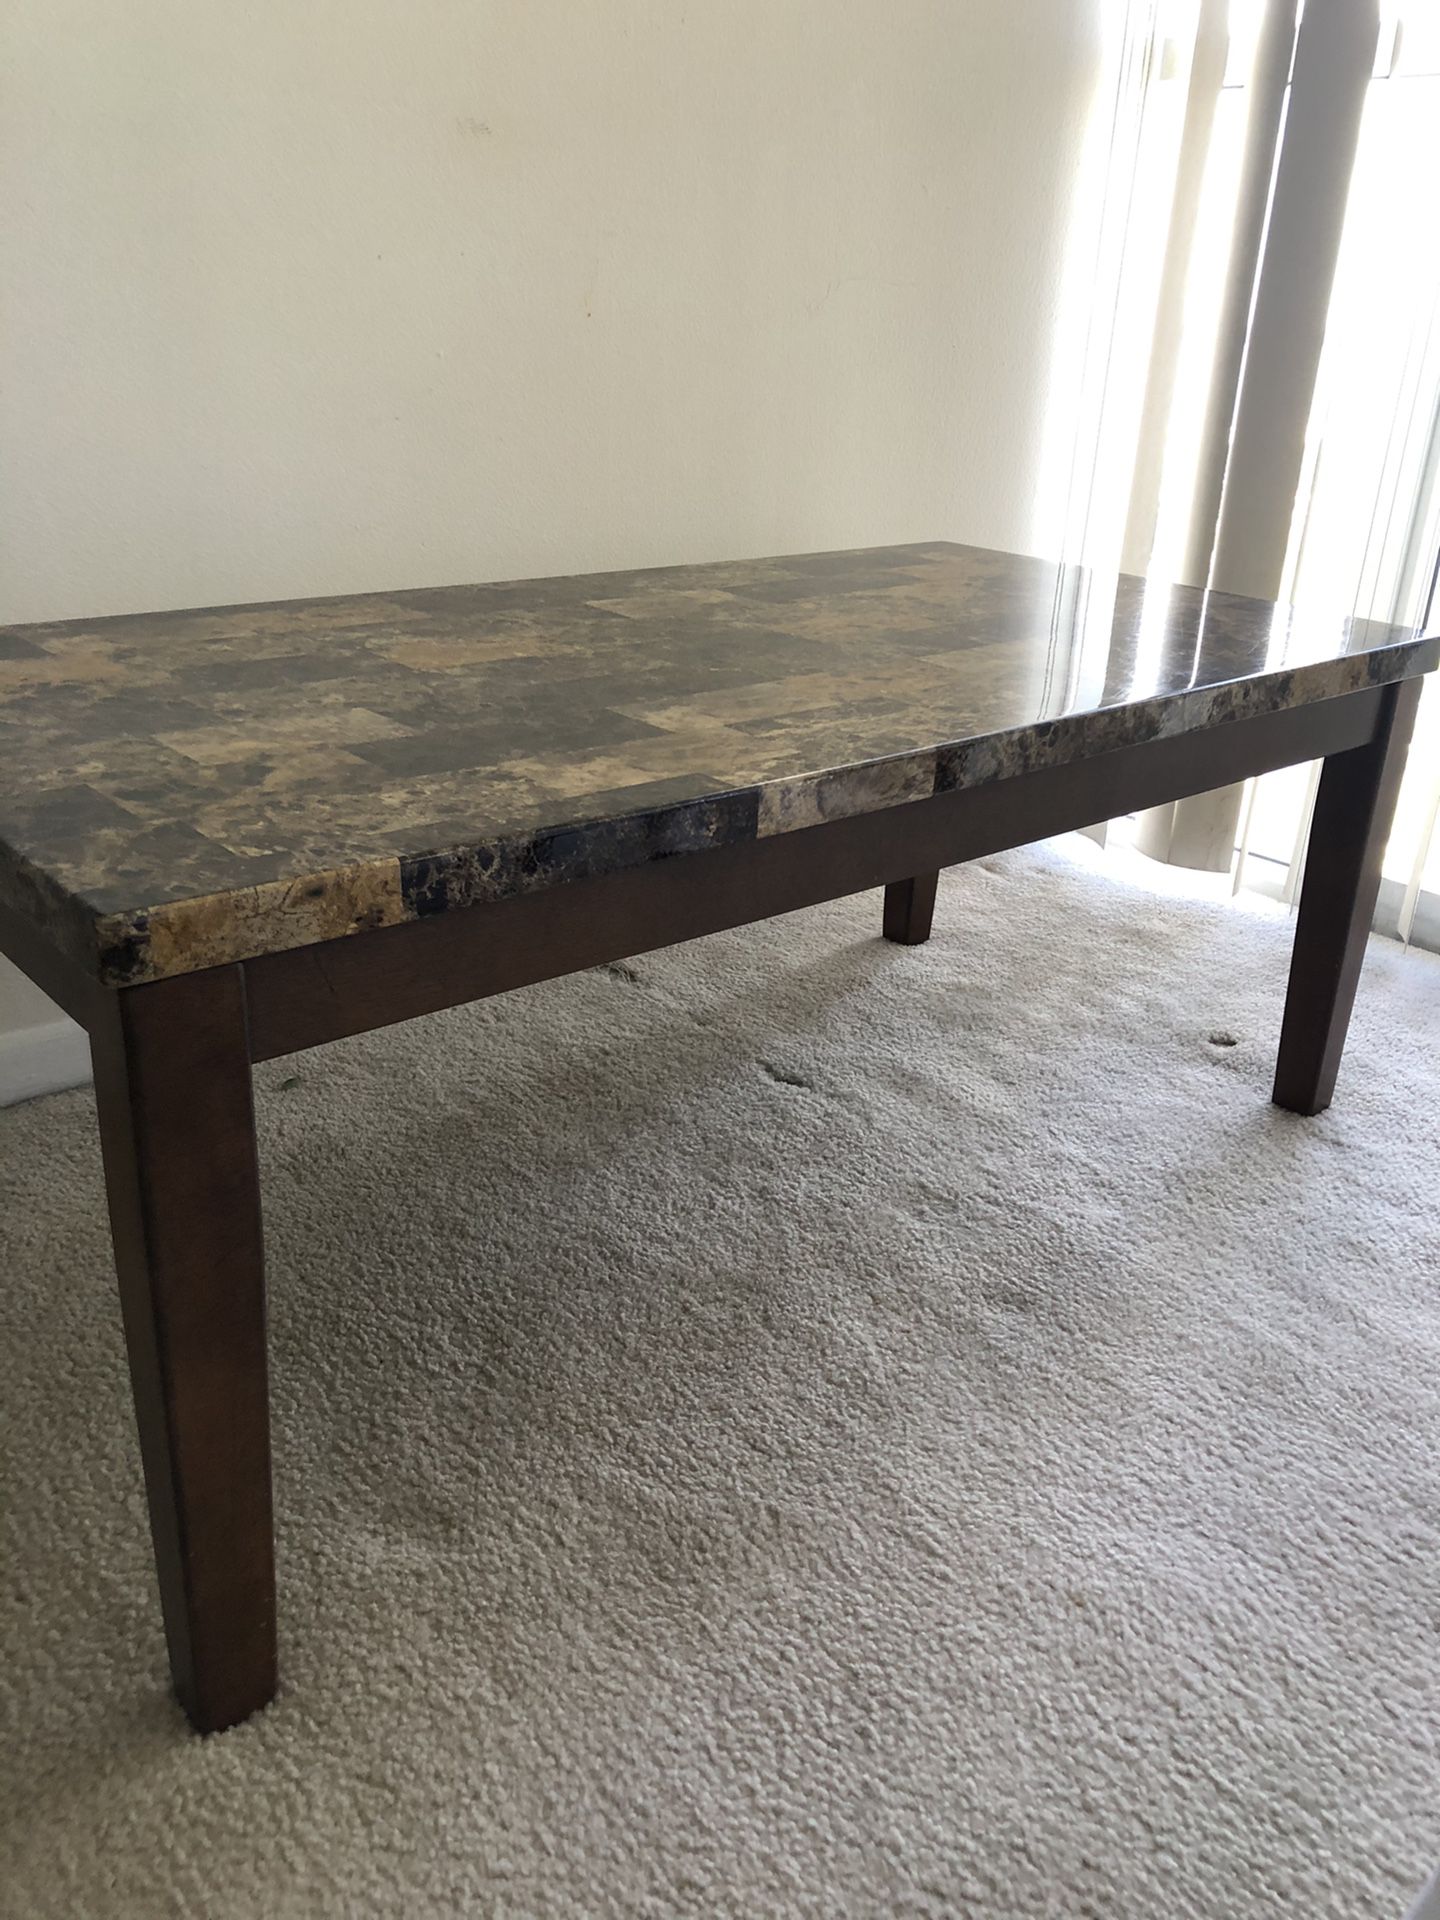 Gently used coffee table set